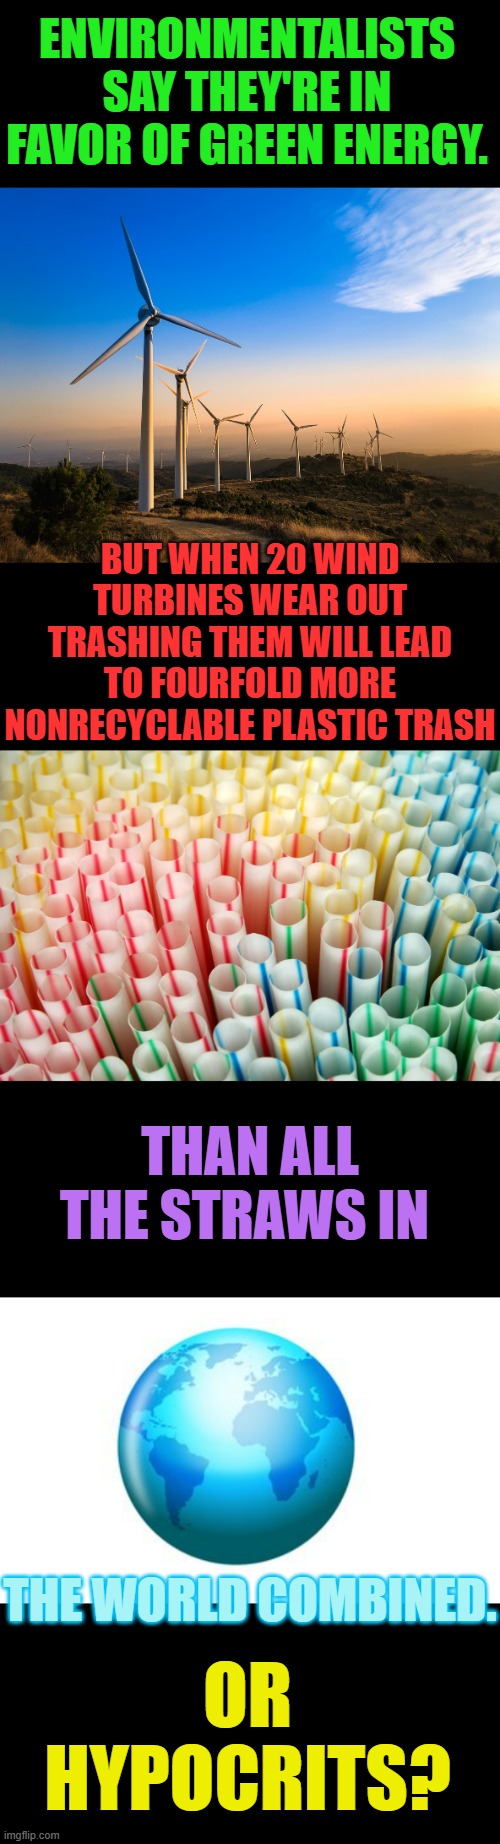 So Are They Real Environmentalists? | ENVIRONMENTALISTS SAY THEY'RE IN FAVOR OF GREEN ENERGY. BUT WHEN 20 WIND TURBINES WEAR OUT TRASHING THEM WILL LEAD TO FOURFOLD MORE NONRECYCLABLE PLASTIC TRASH; THAN ALL THE STRAWS IN; OR HYPOCRITS? THE WORLD COMBINED. | image tagged in memes,politics,environmental,activism,renewable energy,hypocrisy | made w/ Imgflip meme maker